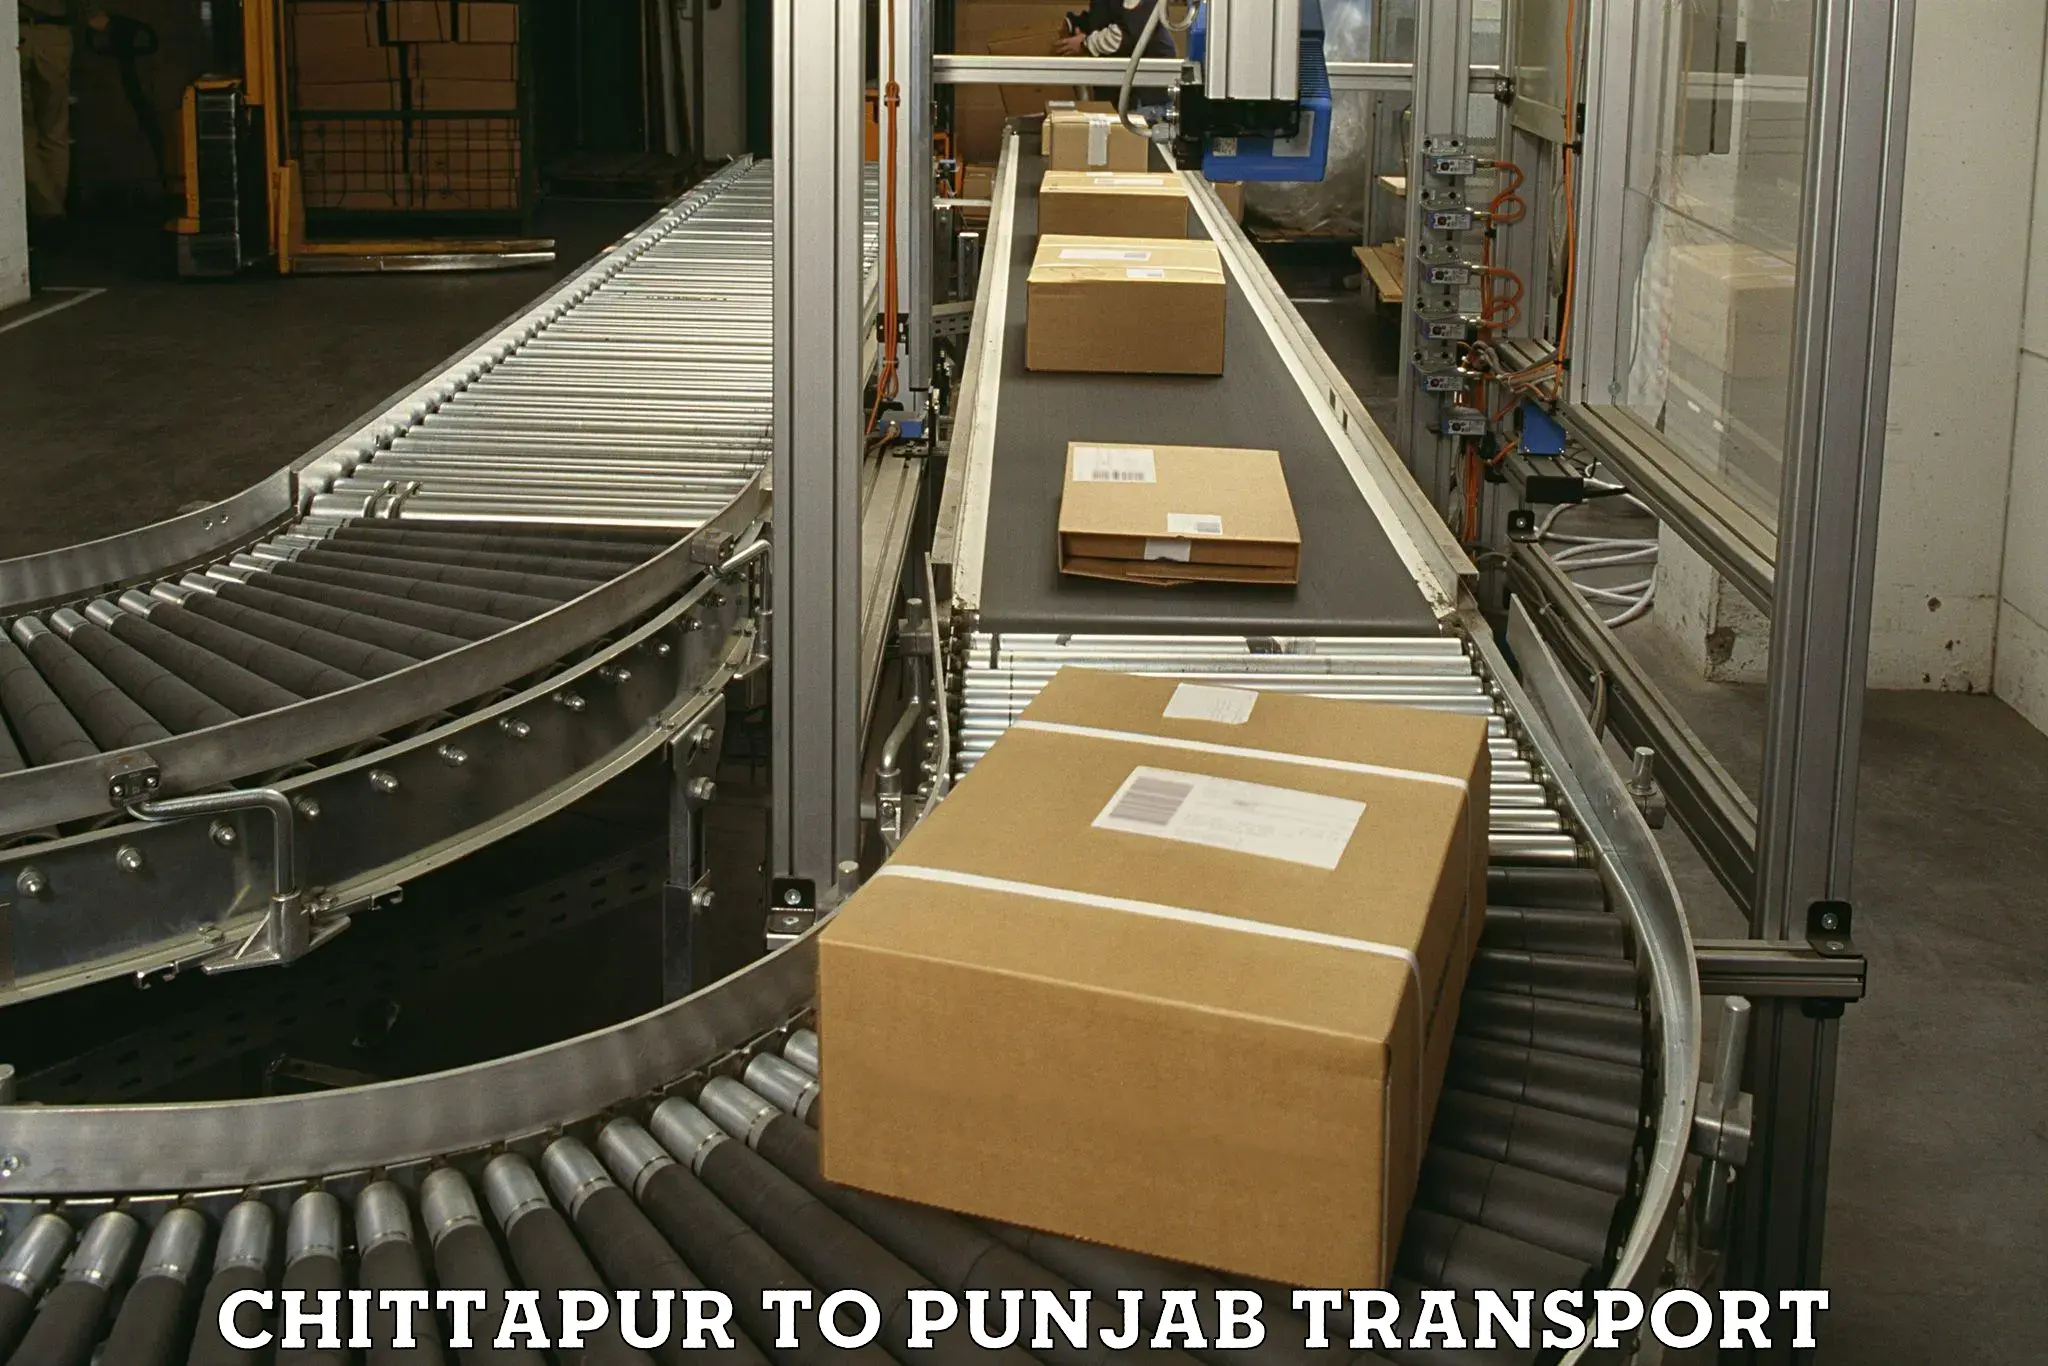 Sending bike to another city Chittapur to Punjab